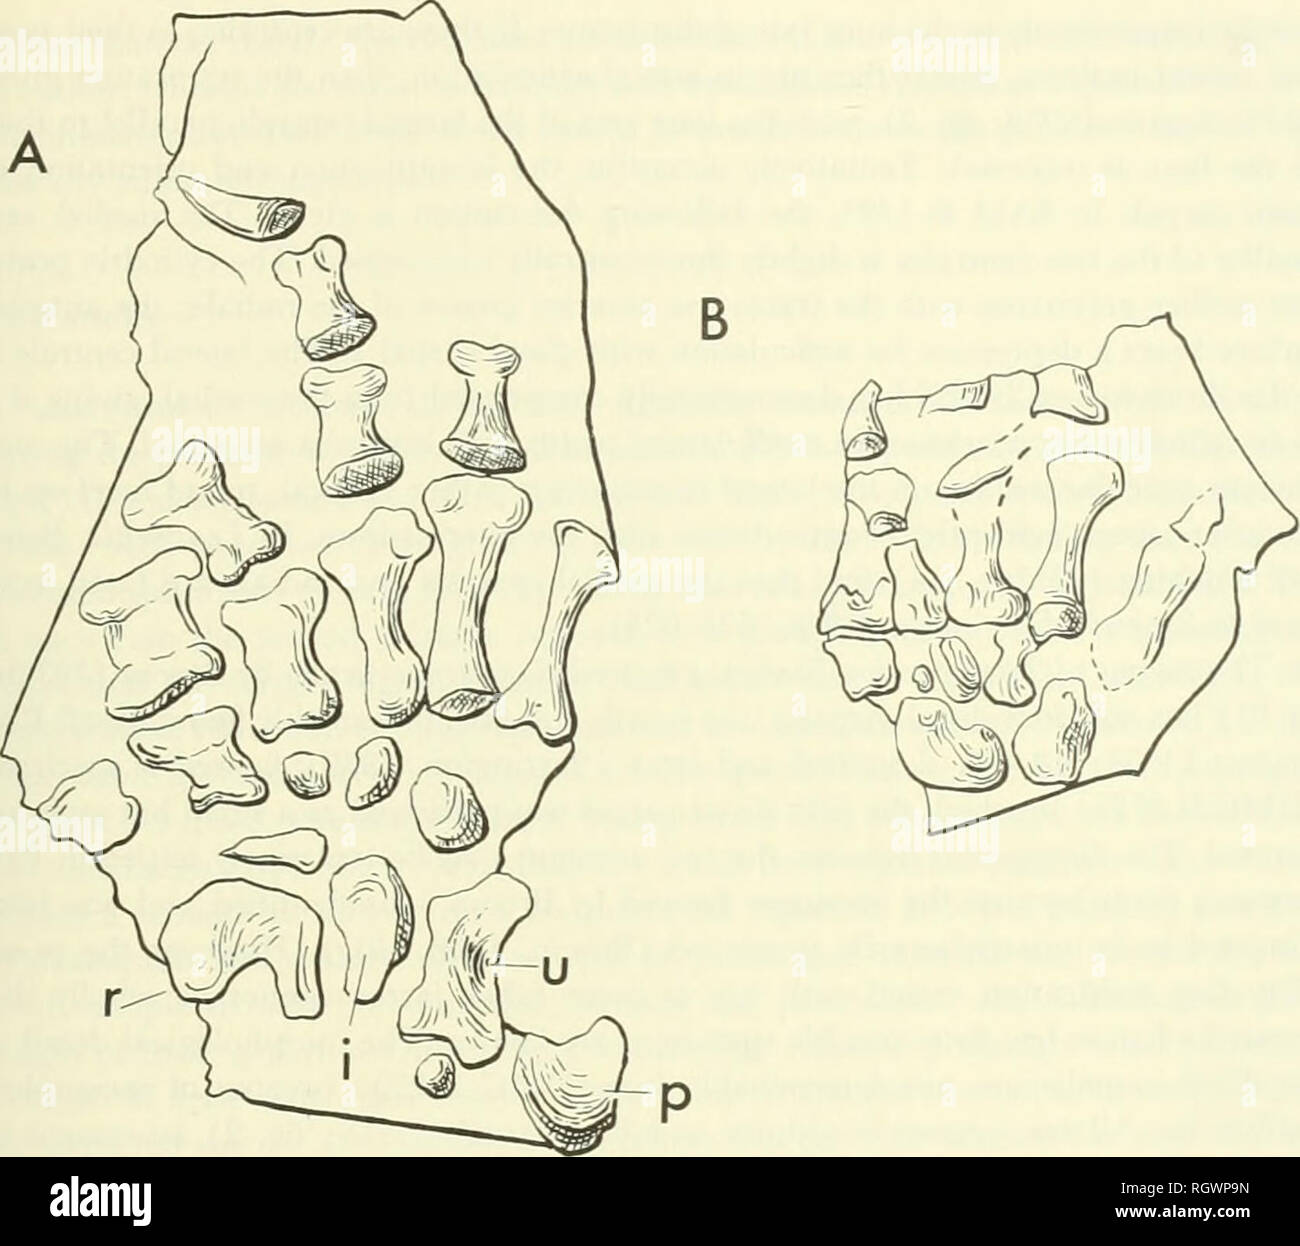 . Bulletin. Natural history. THE POSTCRANIAL SKELETON OF AFRICAN CYNODONTS 127. fig. 34. A, manus and B, pes of Diademodon sp., USNM 23352, showing disparity in size XI.5. Abbreviations as in Fig. 33 except: i, intermedium. A pisiform is known in Thrinaxodon (UMC R. 2733, in which the 11 carpals are disarticulated), in Diademodon (USNM 23352) and in Leavachia (RC 92). In Thrinaxodon the identity of the pisiform is somewhat in doubt, the probability being that it is one of the two elements preserved posterior to the ulnare (see Parrington, 1939: fig. 1). The more posterior of the two is closest Stock Photo